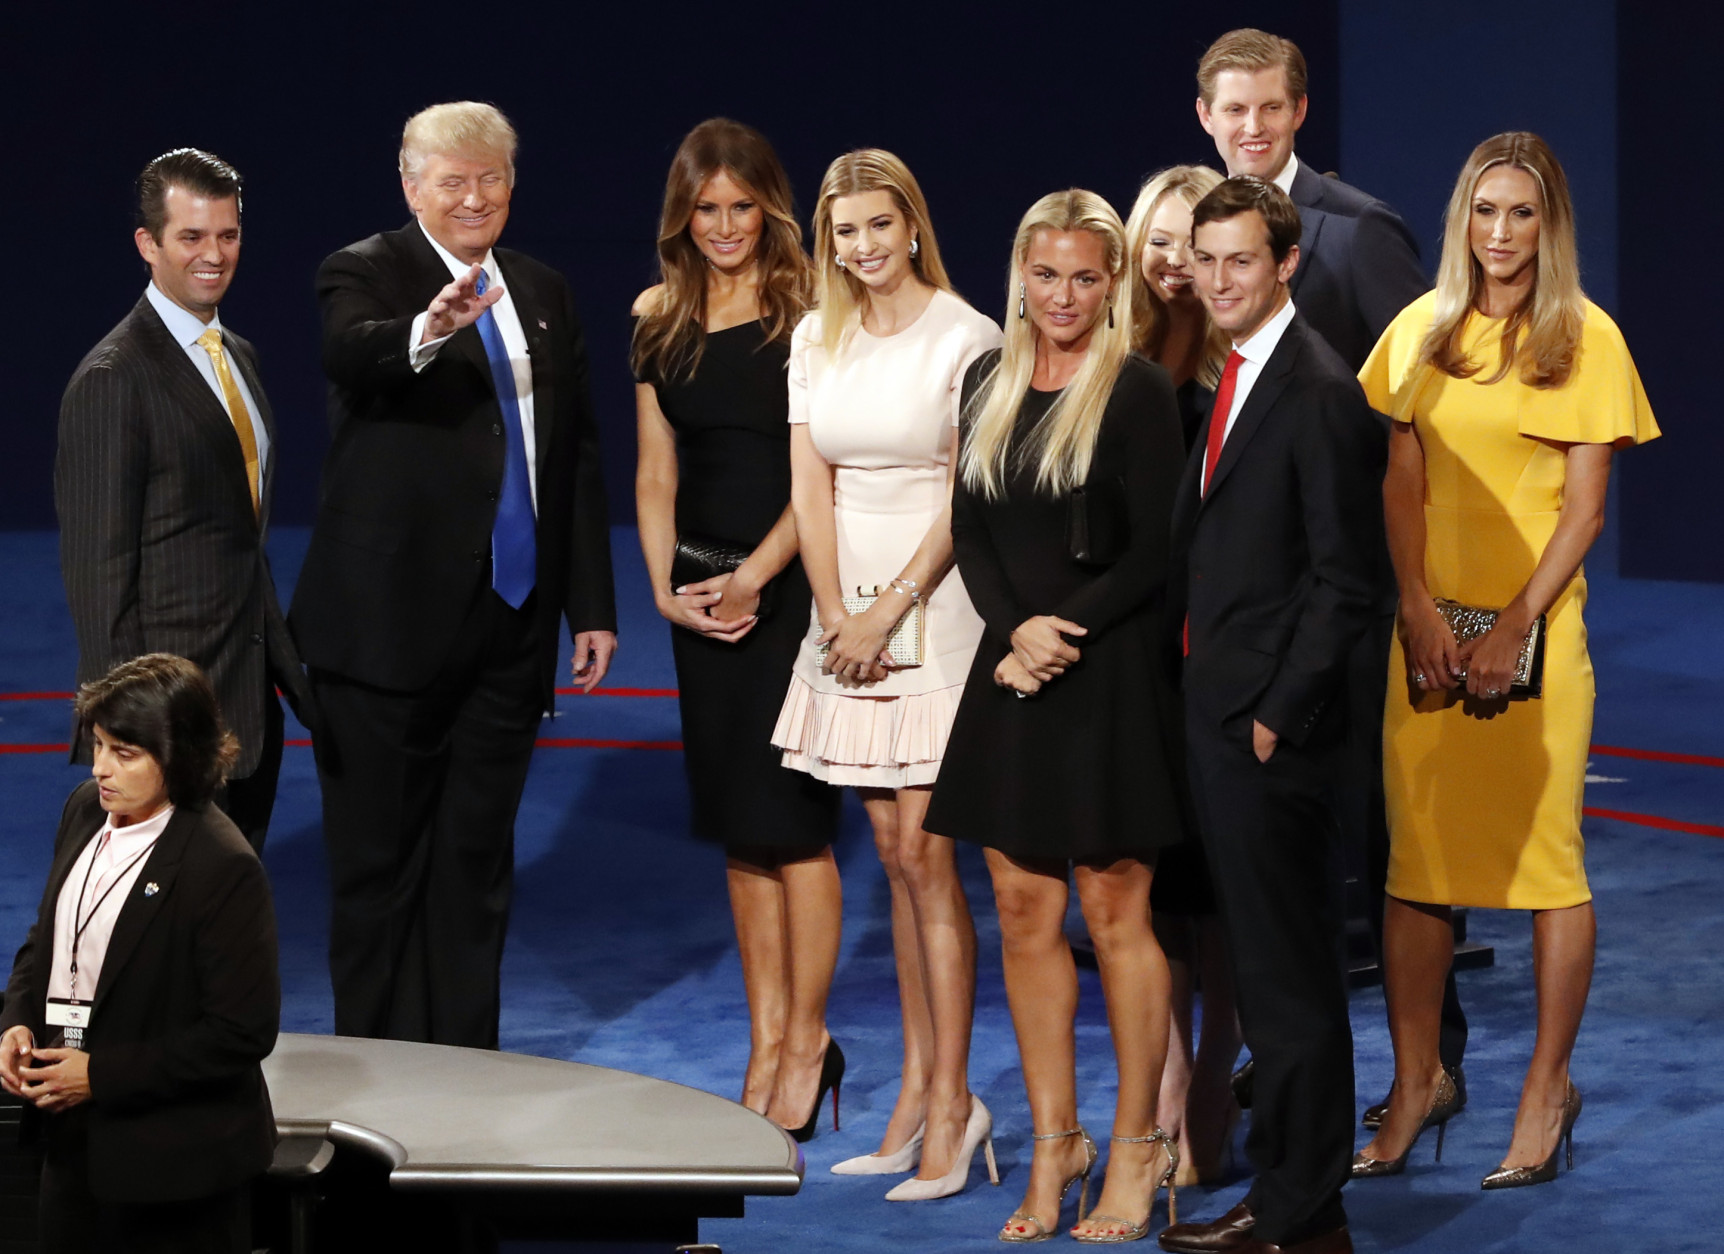 Republican presidential nominee Donald Trump, second from left, his wife Melania Trump, third from left, and family members appear on stage after the presidential debate with Democratic presidential nominee Hillary Clinton at Hofstra University in Hempstead, N.Y., Monday, Sept. 26, 2016. (AP Photo/Mary Altaffer)